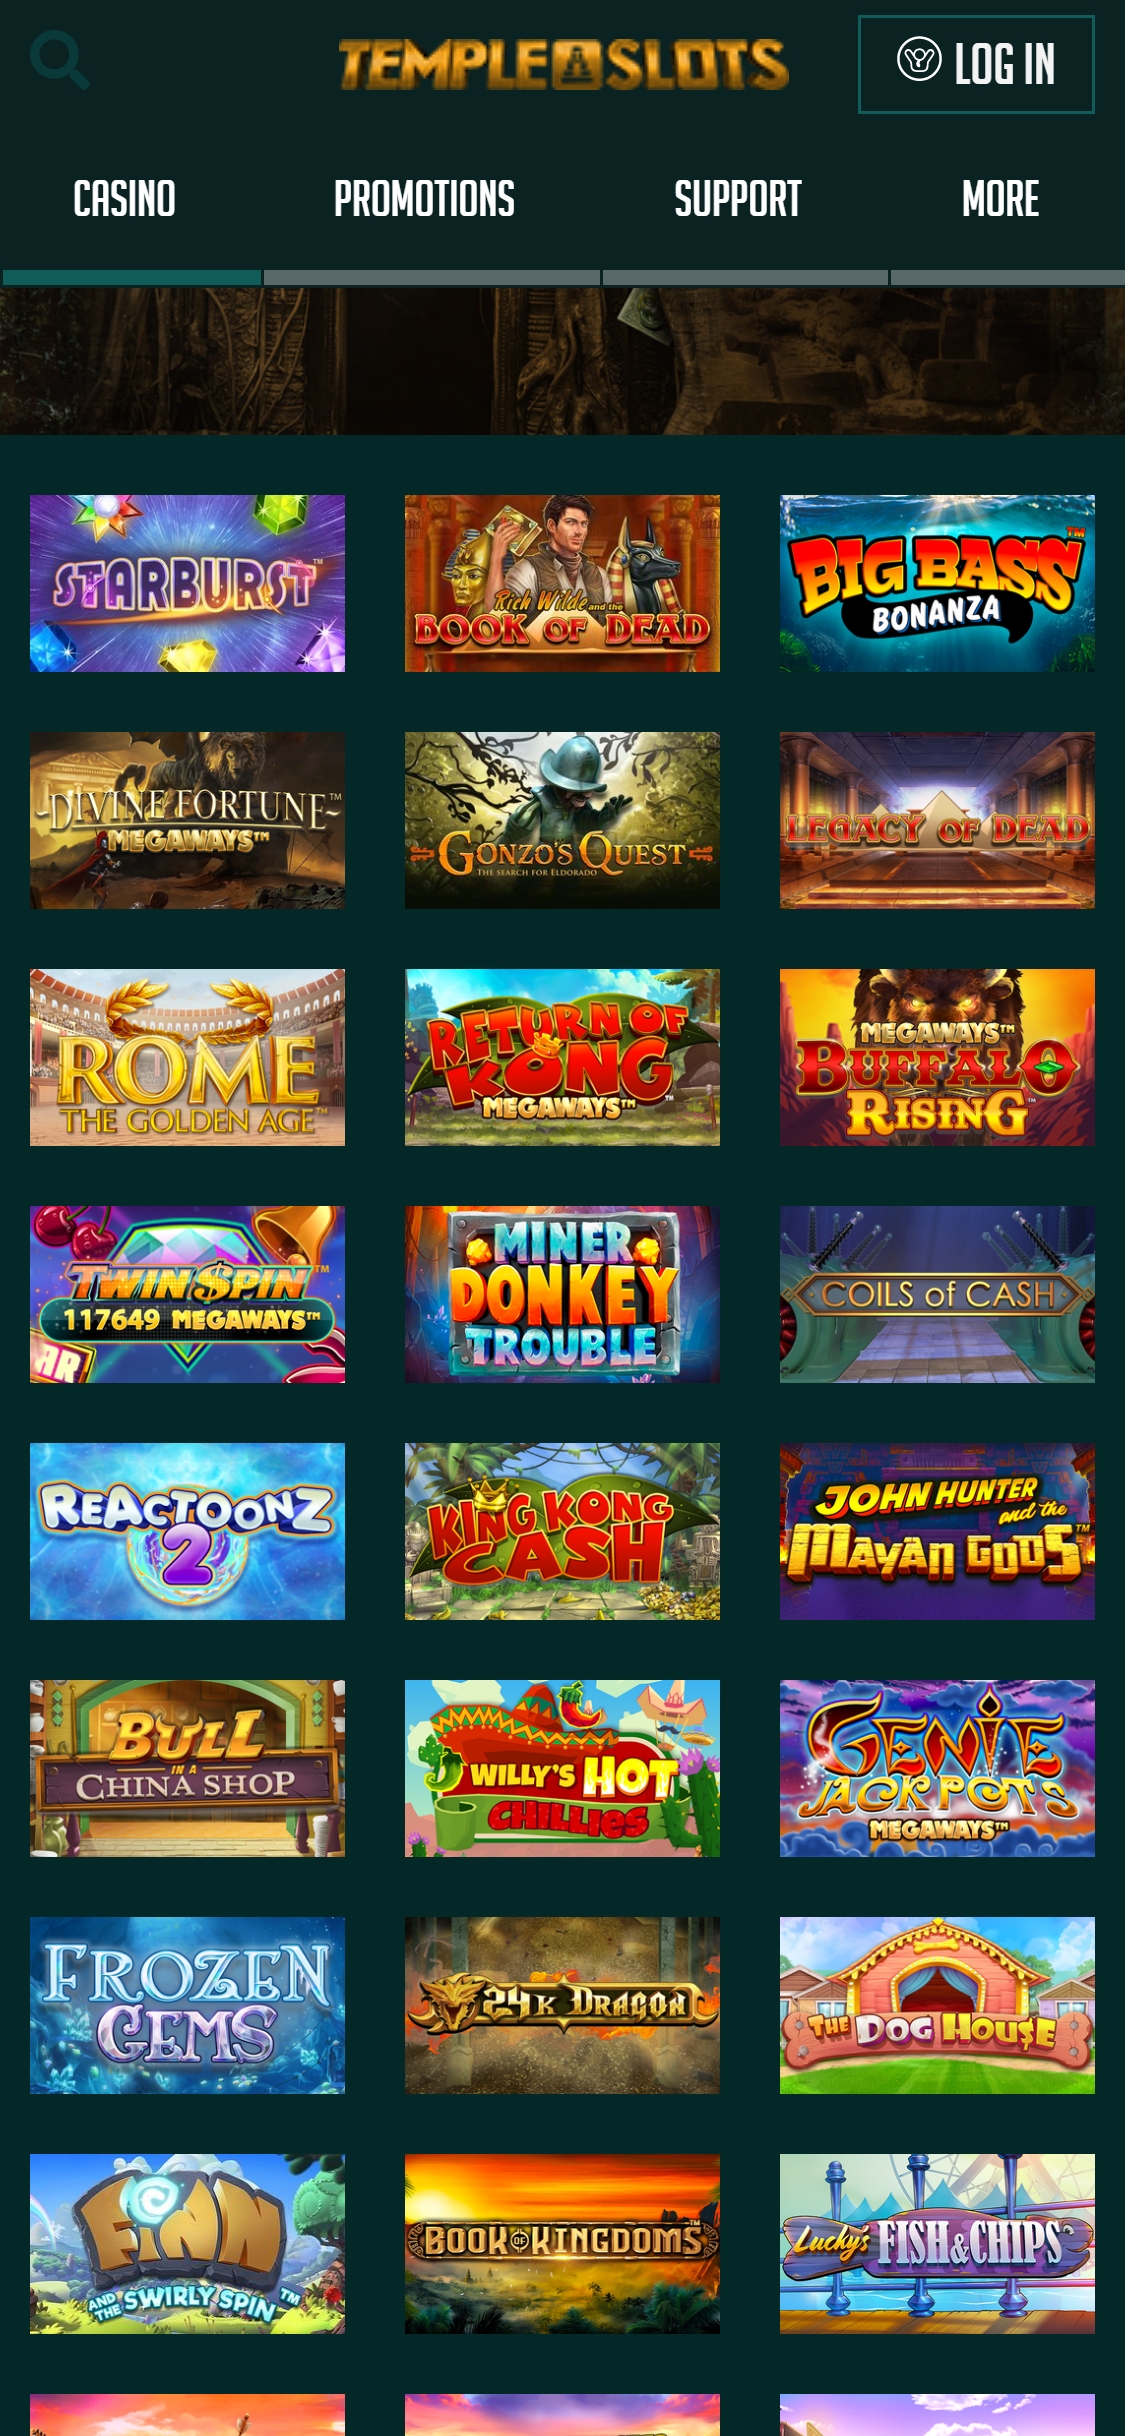 Temple Slots Casino Mobile Games Review